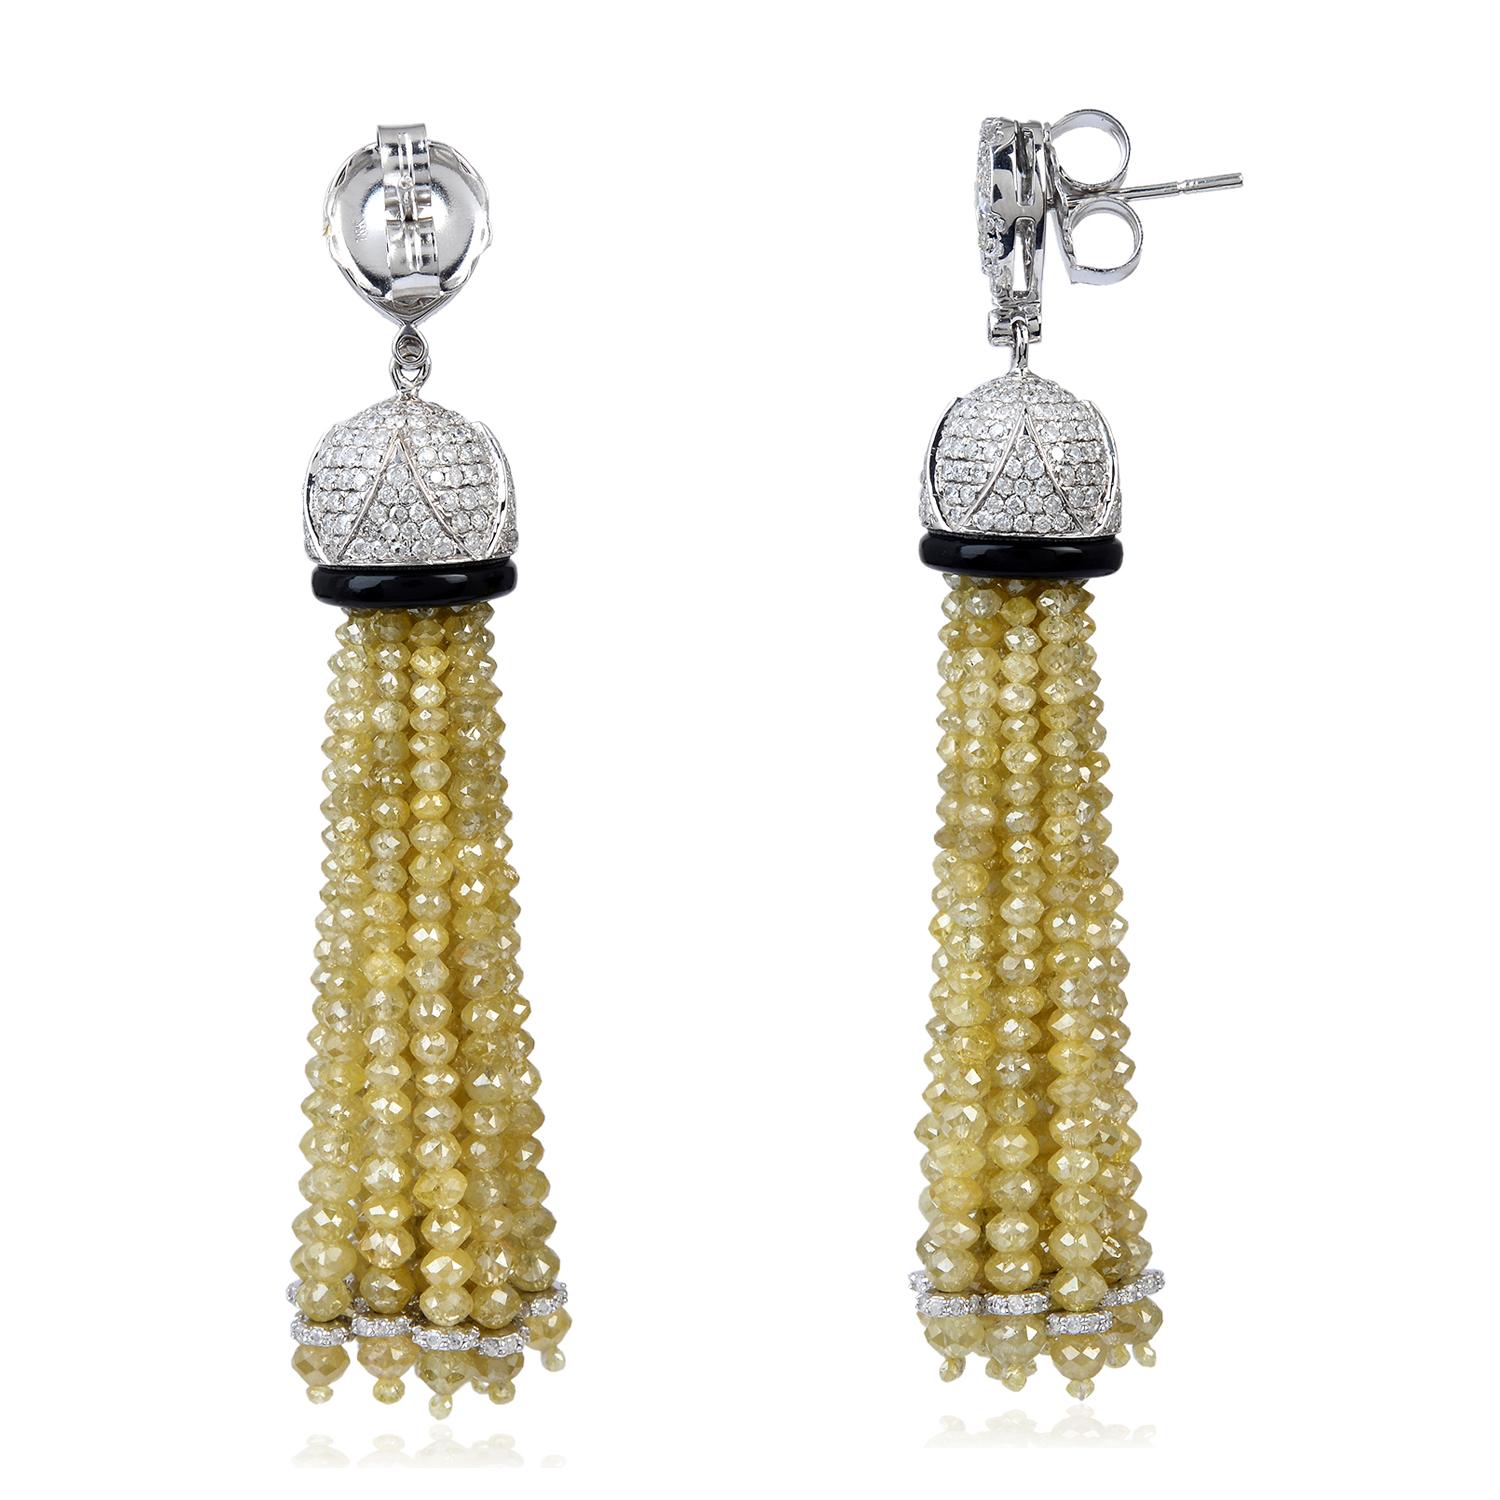 These stunning tassel earrings are handmade in 18-karat gold.  It is set with 2.35 carats onyx and 65.26 carats of glittering diamonds.

FOLLOW  MEGHNA JEWELS storefront to view the latest collection & exclusive pieces.  Meghna Jewels is proudly